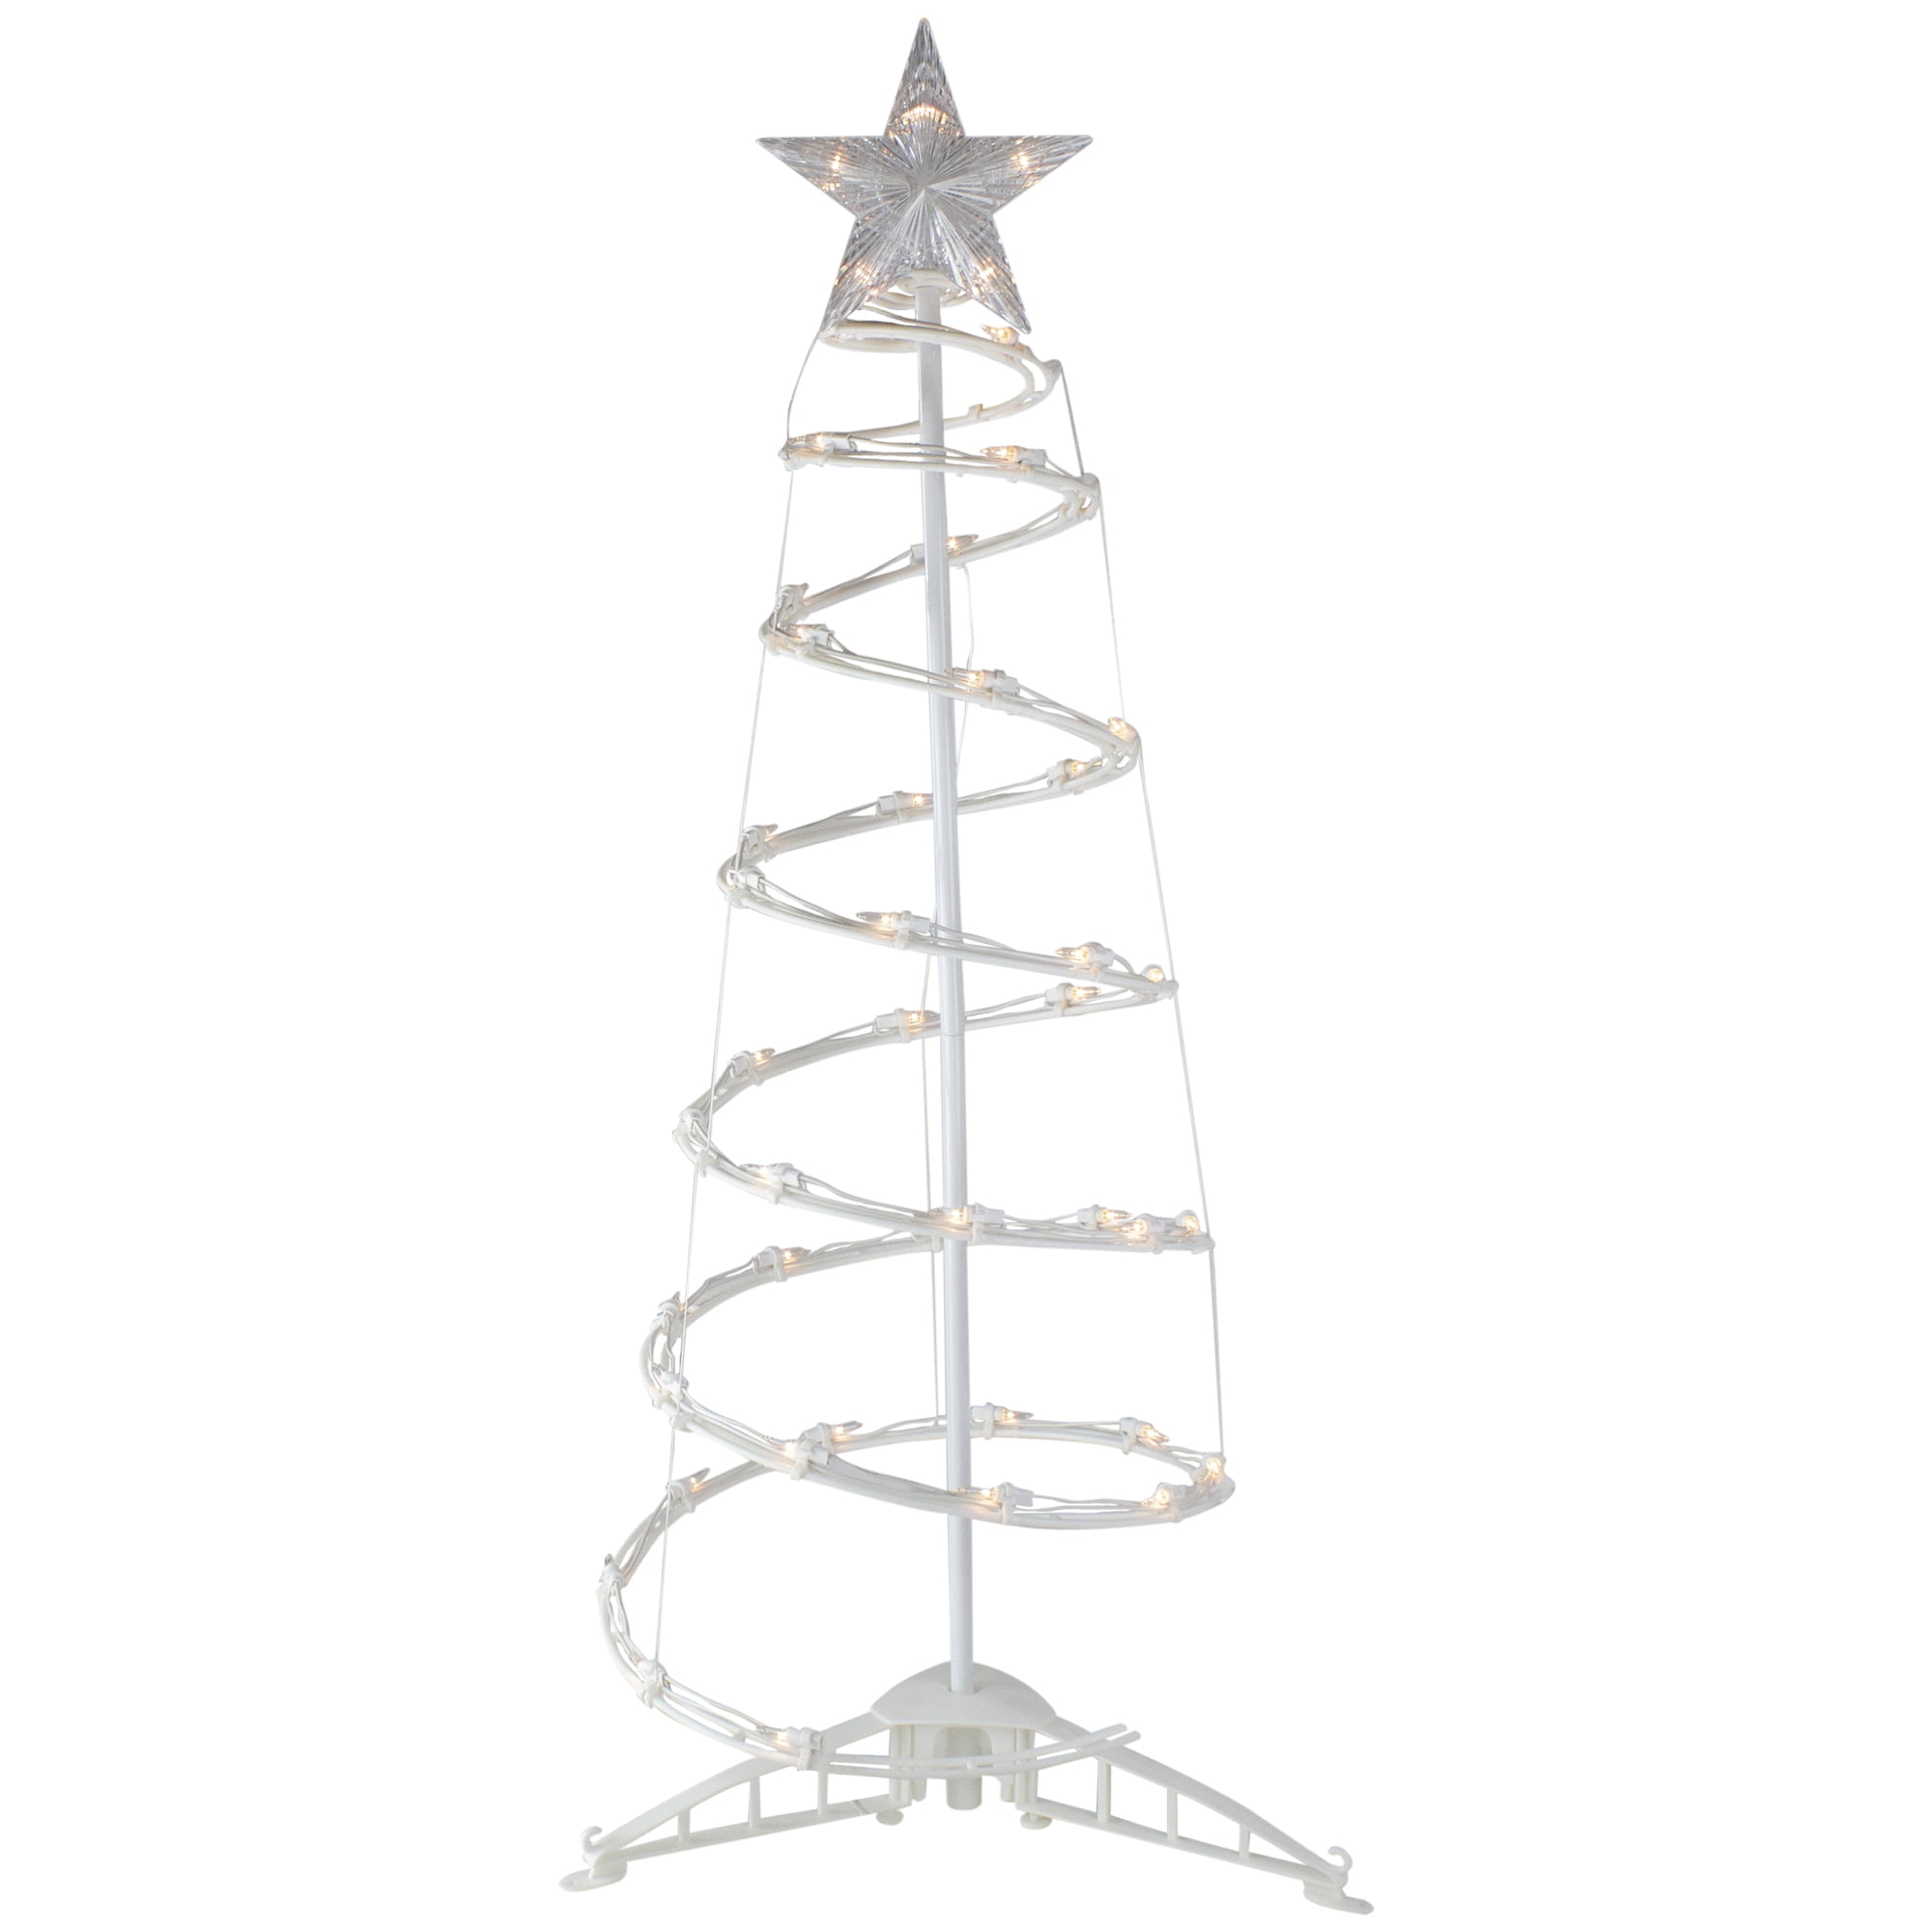 Northlight 3' Lighted Spiral Cone Tree Outdoor Christmas Decoration ...